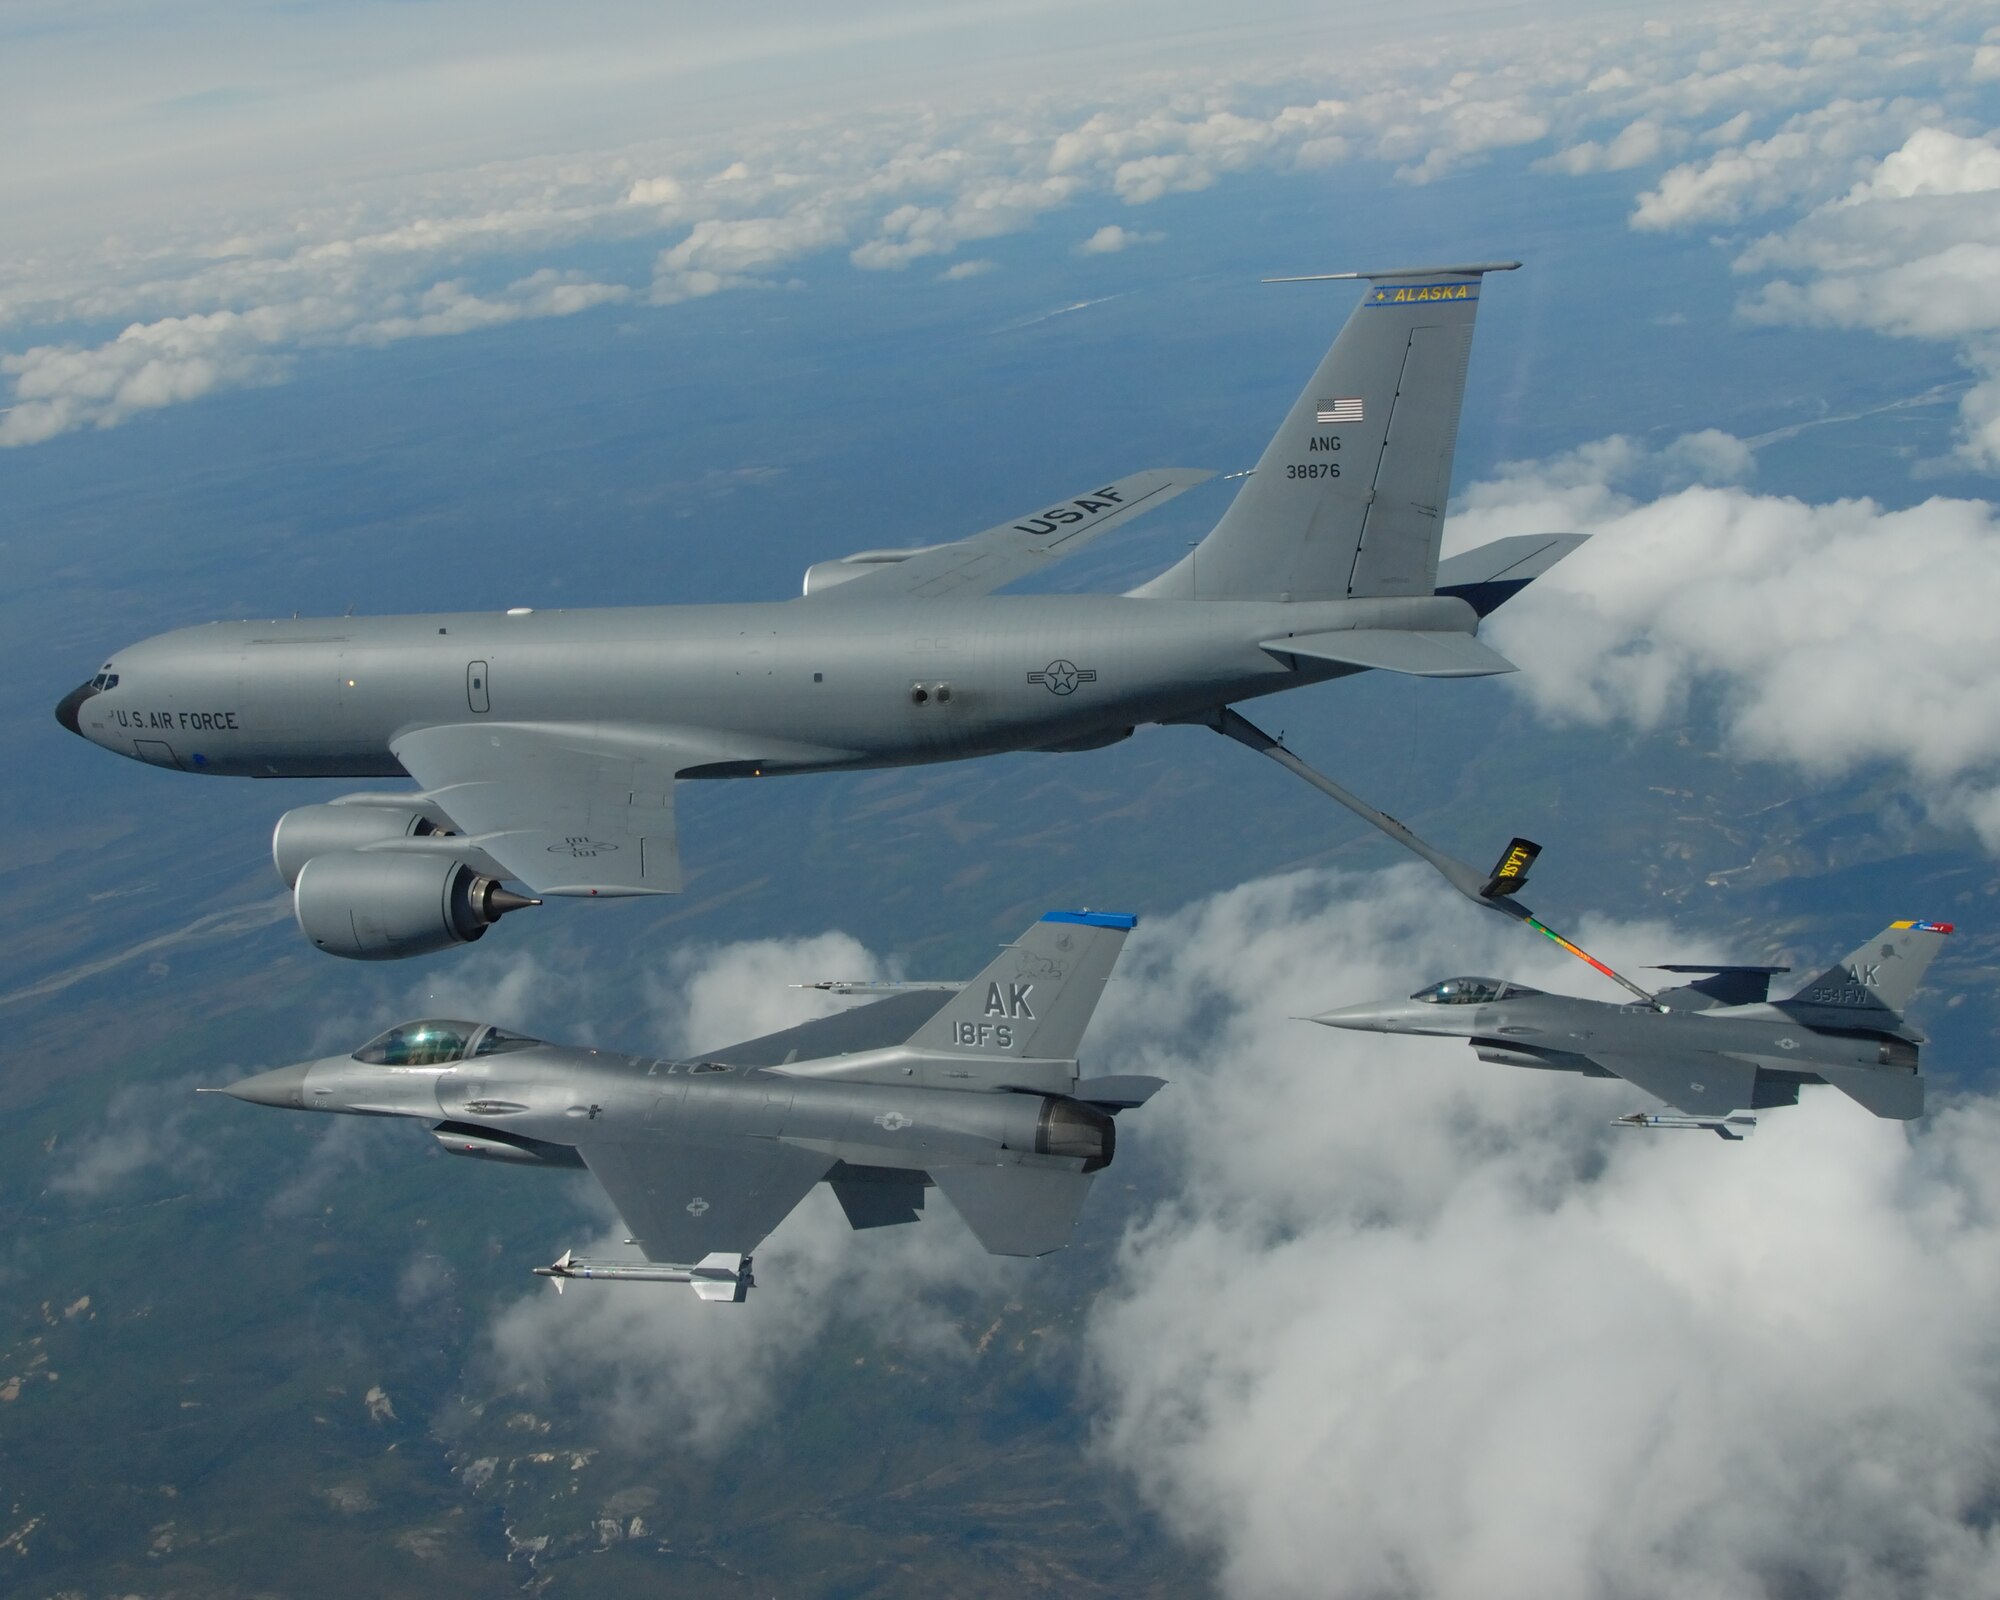 EIELSON AIR FORCE BASE, Alaska -- A KC-135R Stratotanker, 168th Air Refueling Wing, Alaska Air National Guard, refuels two F-16 Fighting Falcons from the 18th Fighter Squadron over the Pacific Alaska Range Complex May 29, 2007.  The three aircraft assigned to Eielson flew in formation for the last time due to the deactivation of the 355th FS, and the 18th FS.  (U.S. Air Force photo by Master Sergeant Rob Wieland) 